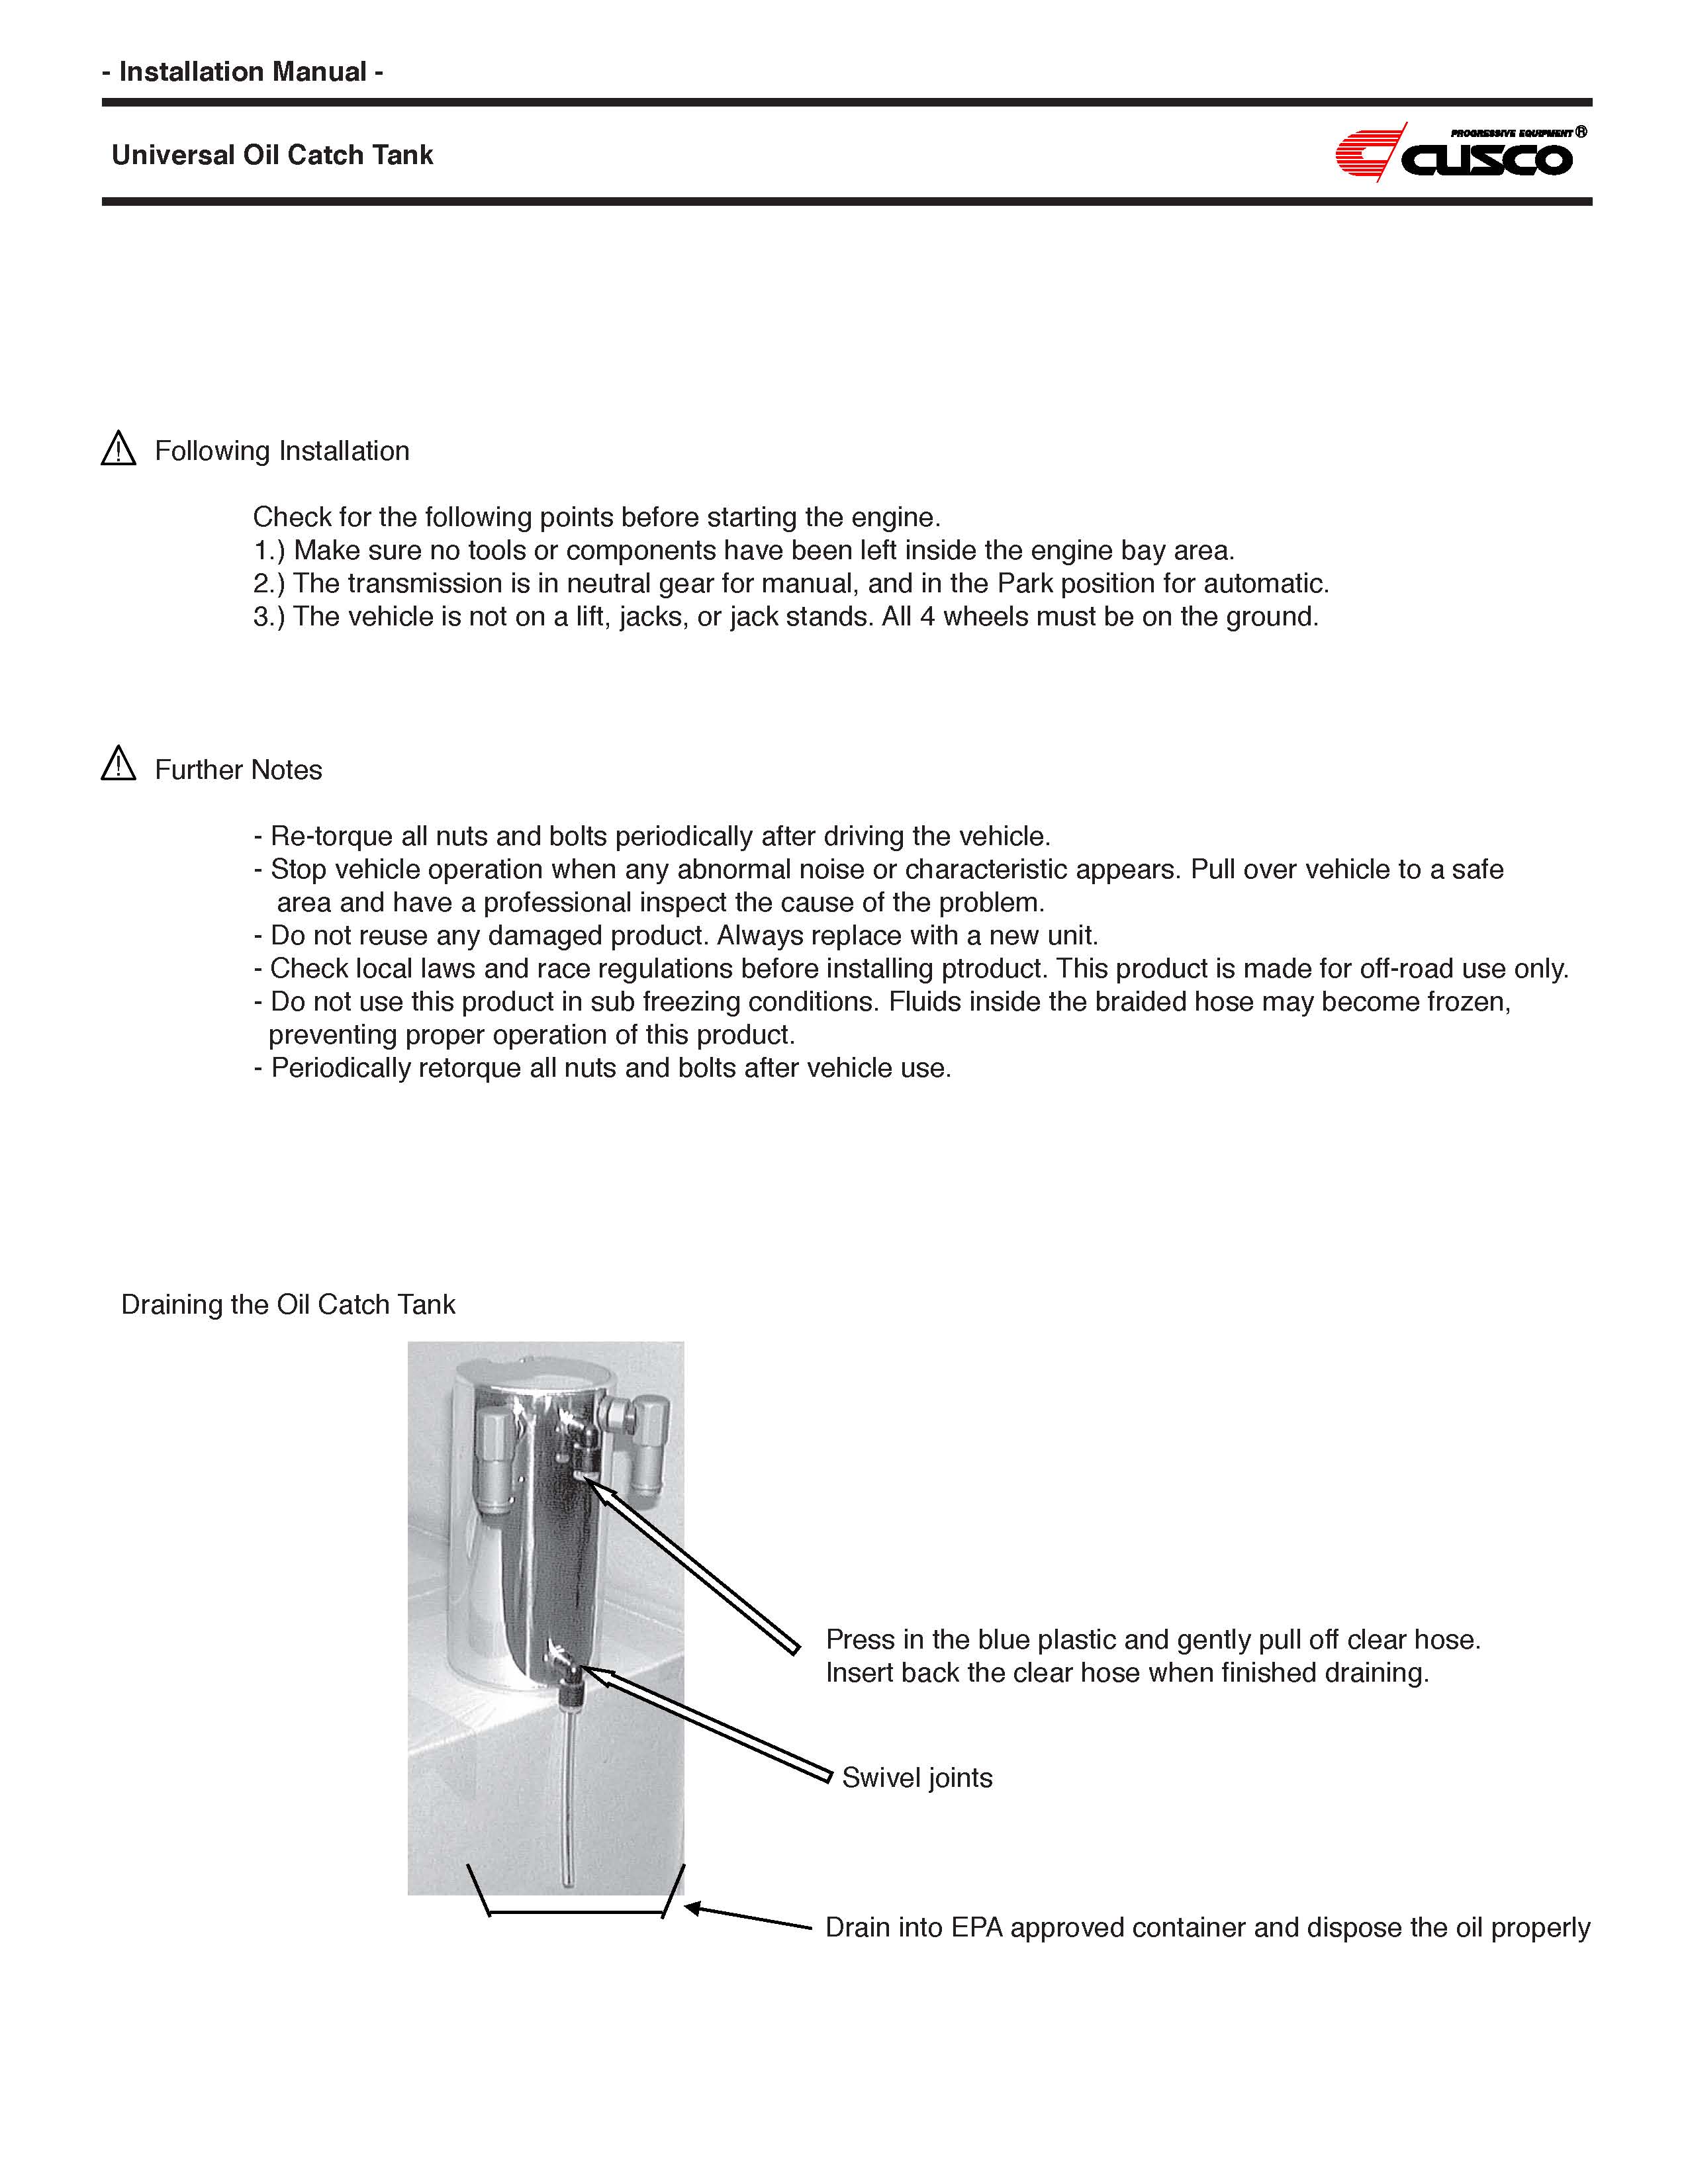 calibre oil catch can instructions